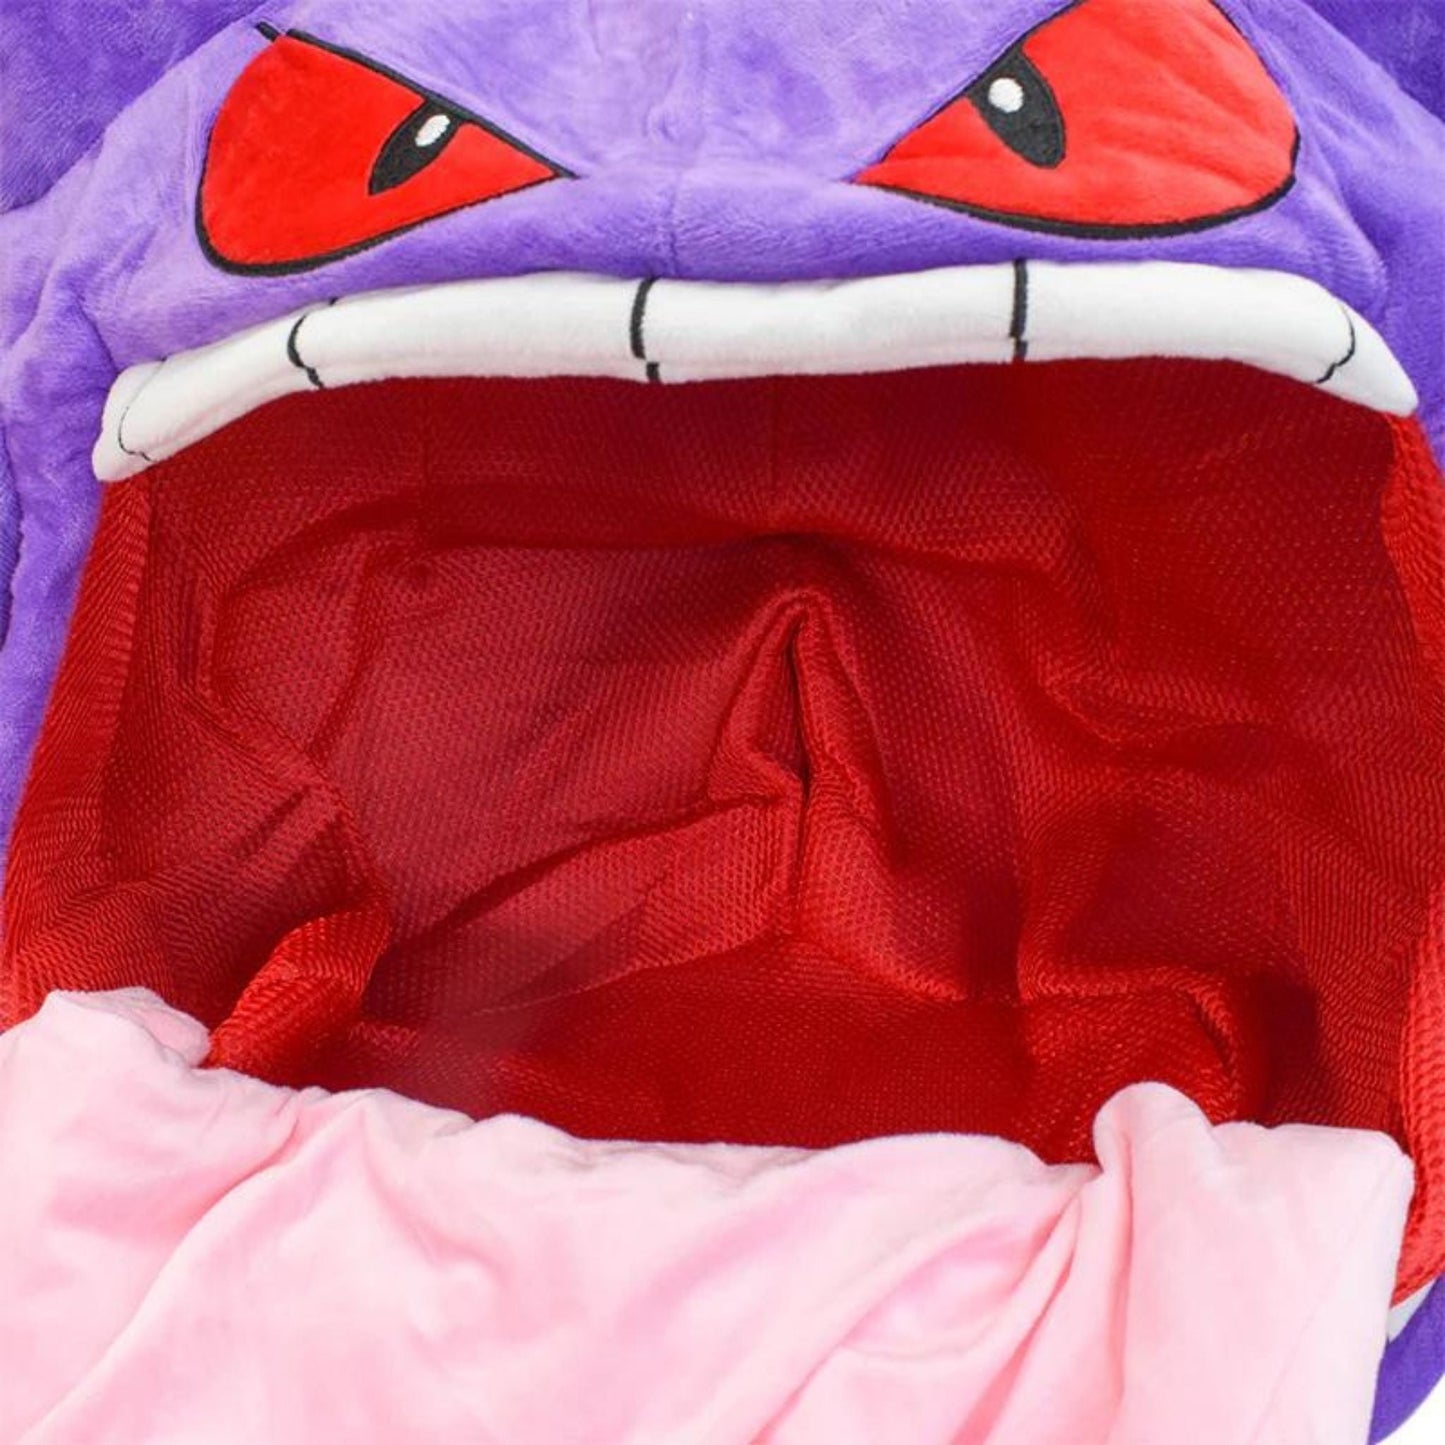 Mouth Head Interior - Gengar Tongue Pillow Blanket Sleeping Pod For Afternoon Naps. Portable design for travel, work and on the go napping. Perfect gift for Pokémon fans.